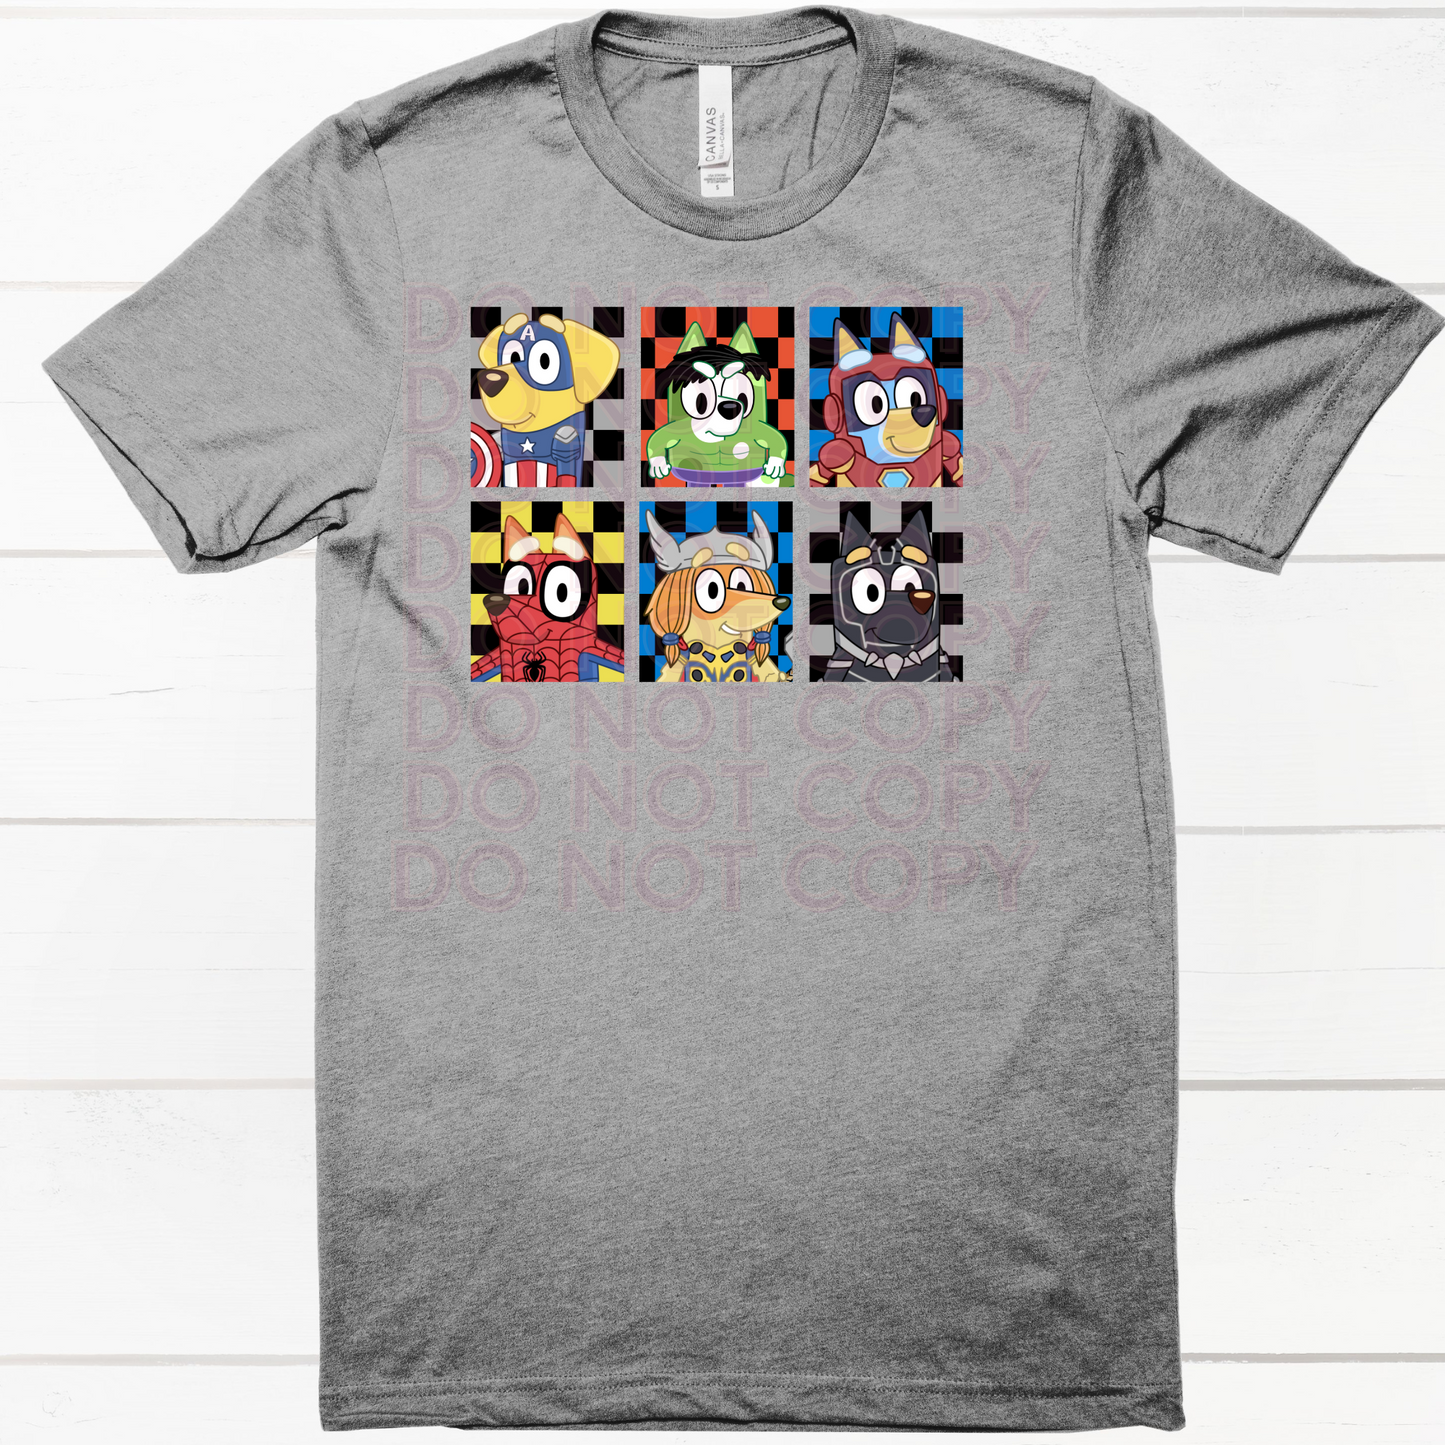 Everyone Assemble!  -Choose Your shirt & Design Style- Adult Sizes - 2 Peas Tees